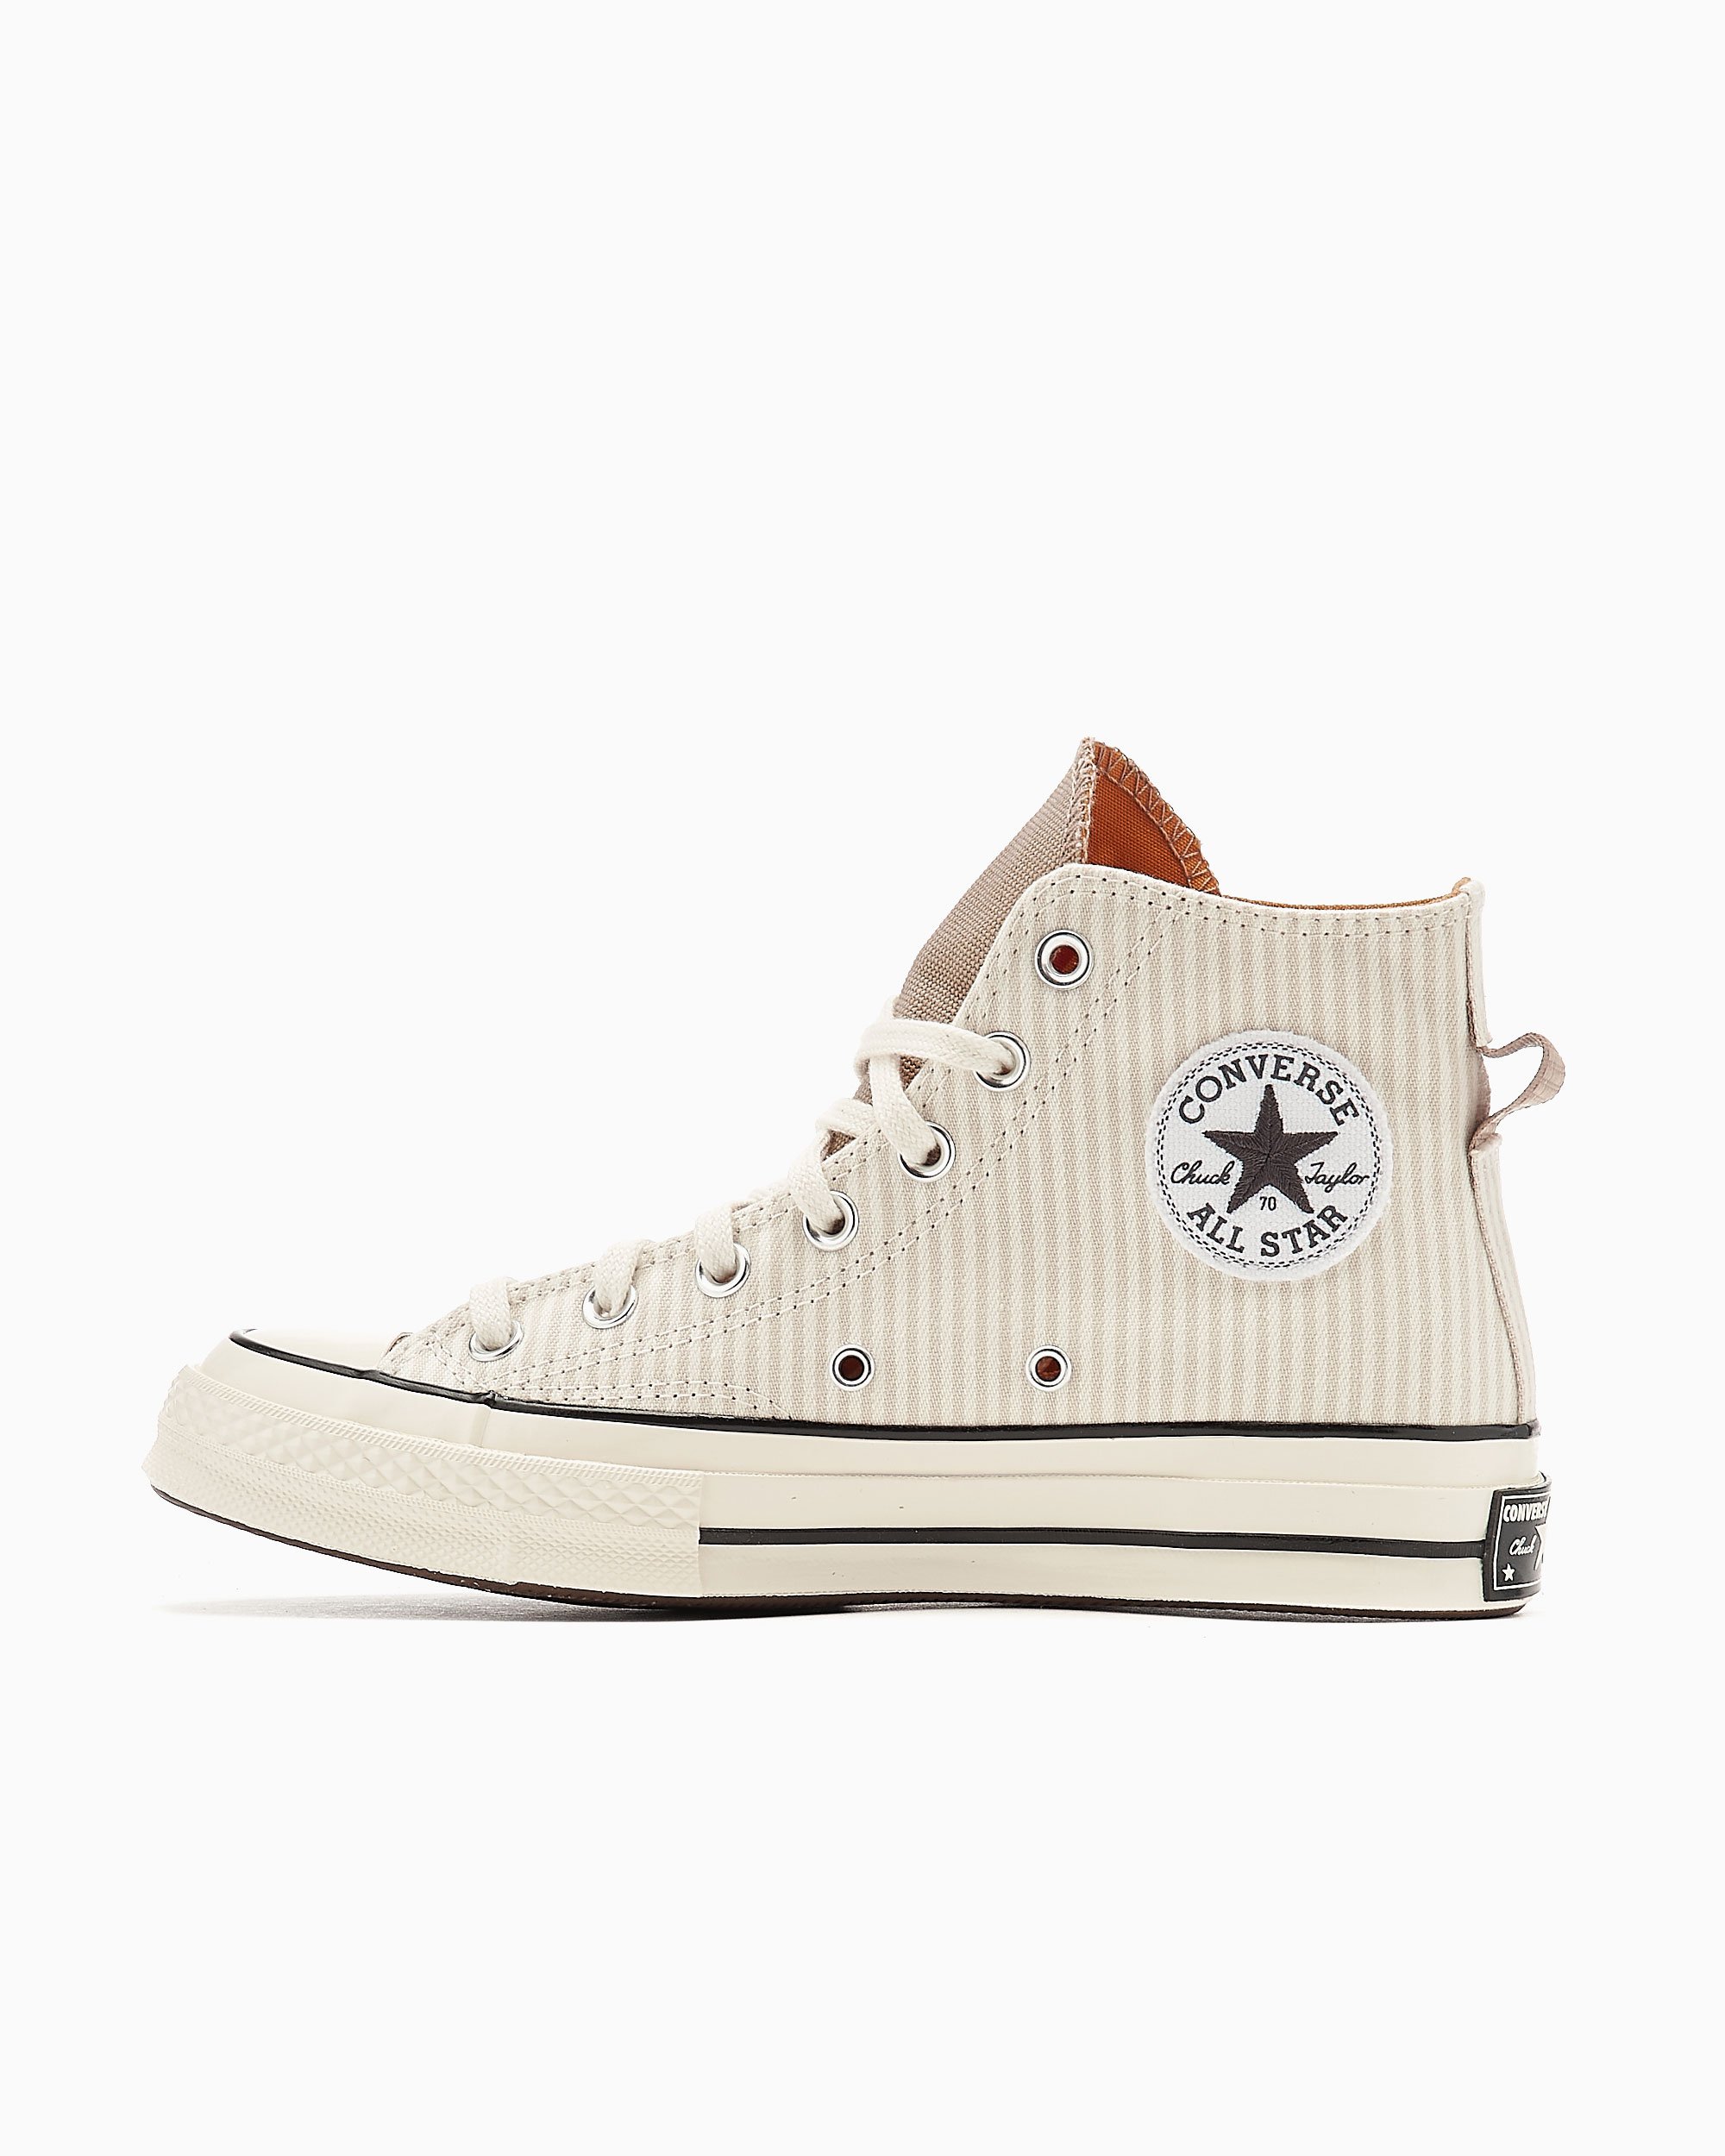 Converse Chuck 70 Crafted Stripe Beige A00473C| Buy Online at FOOTDISTRICT